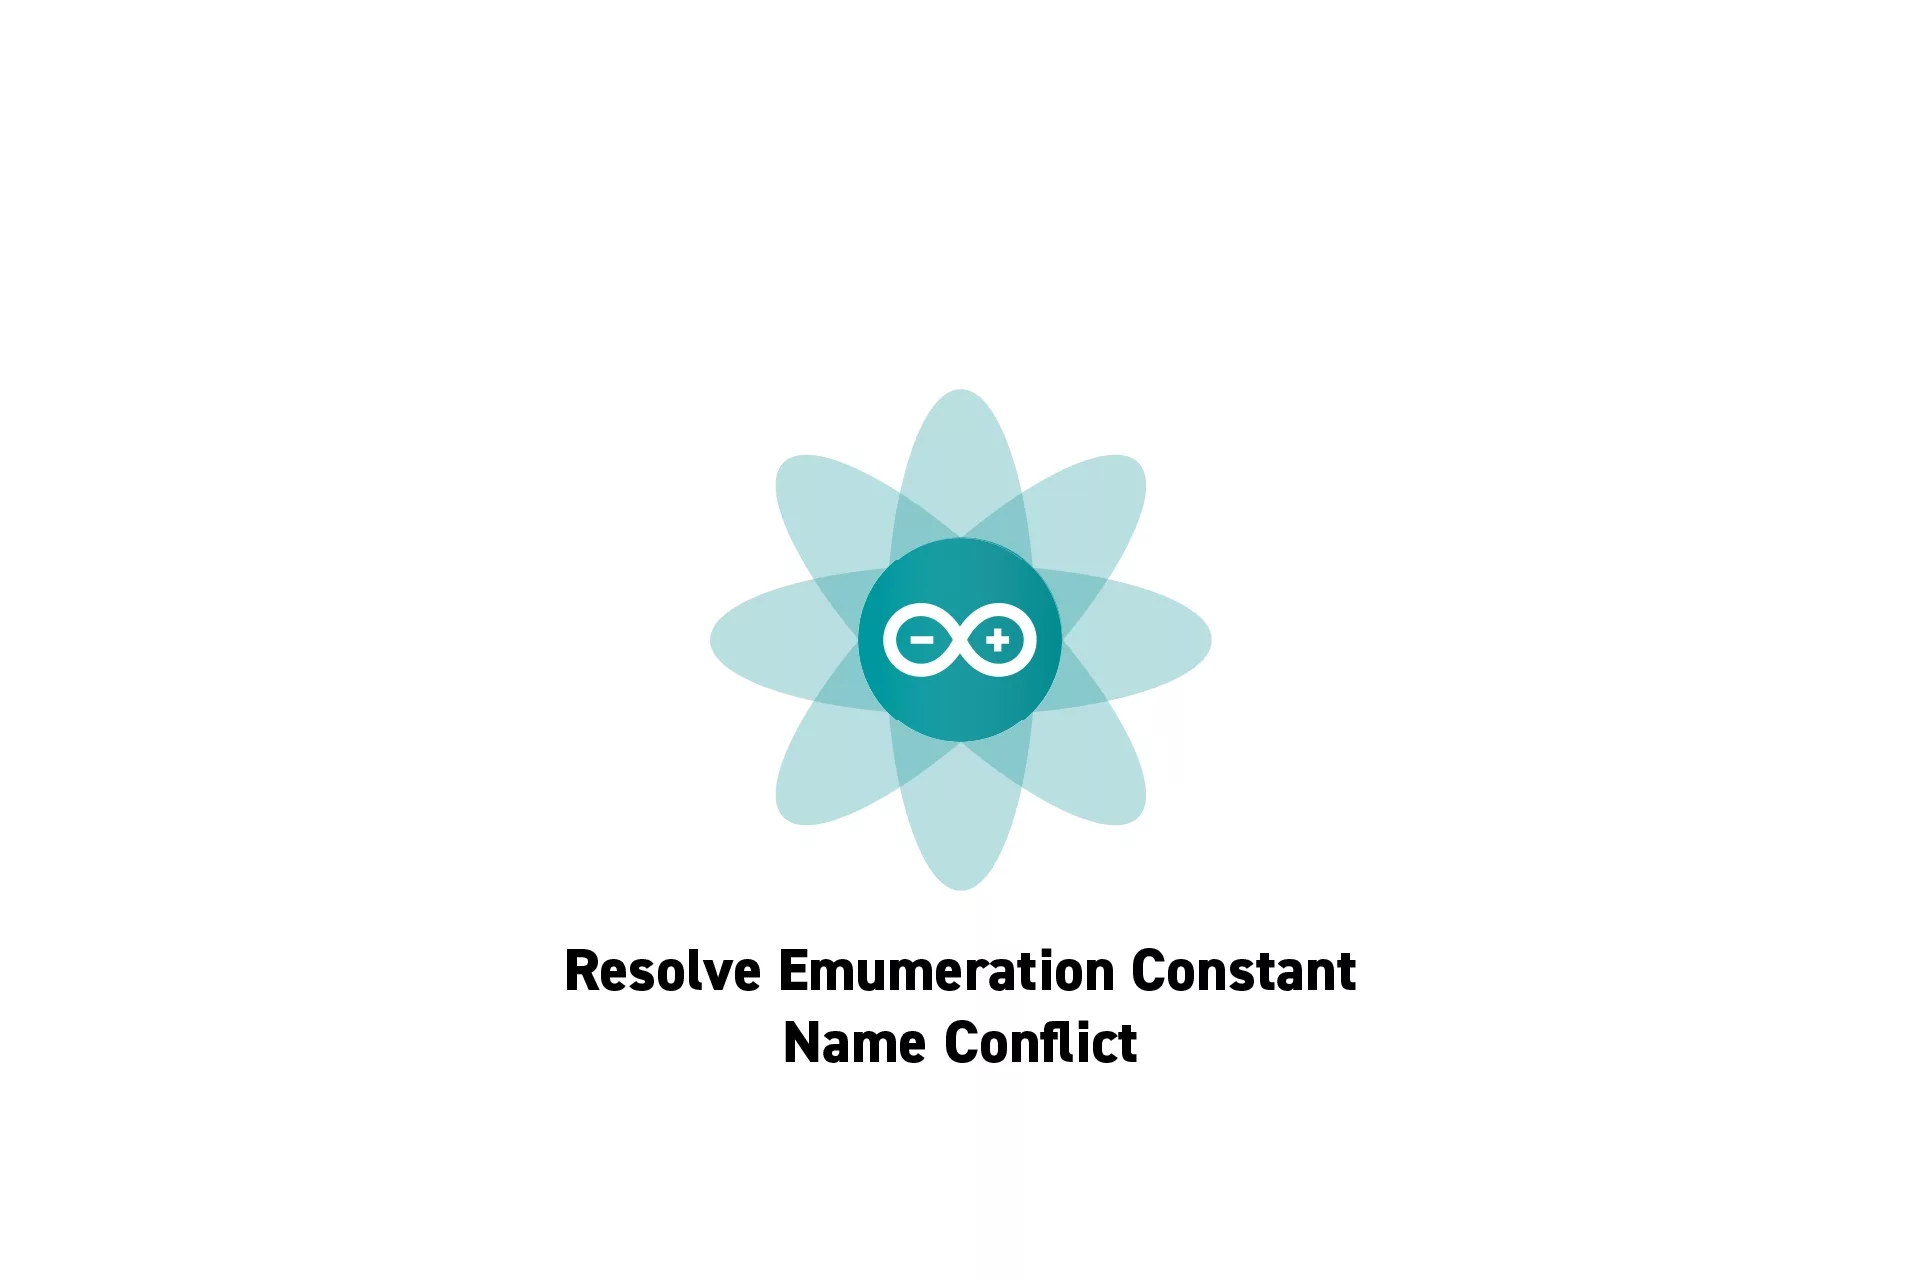 A flower that represents Arduino with the text "Resolve Emumeration Constant Name Conflict" beneath it.